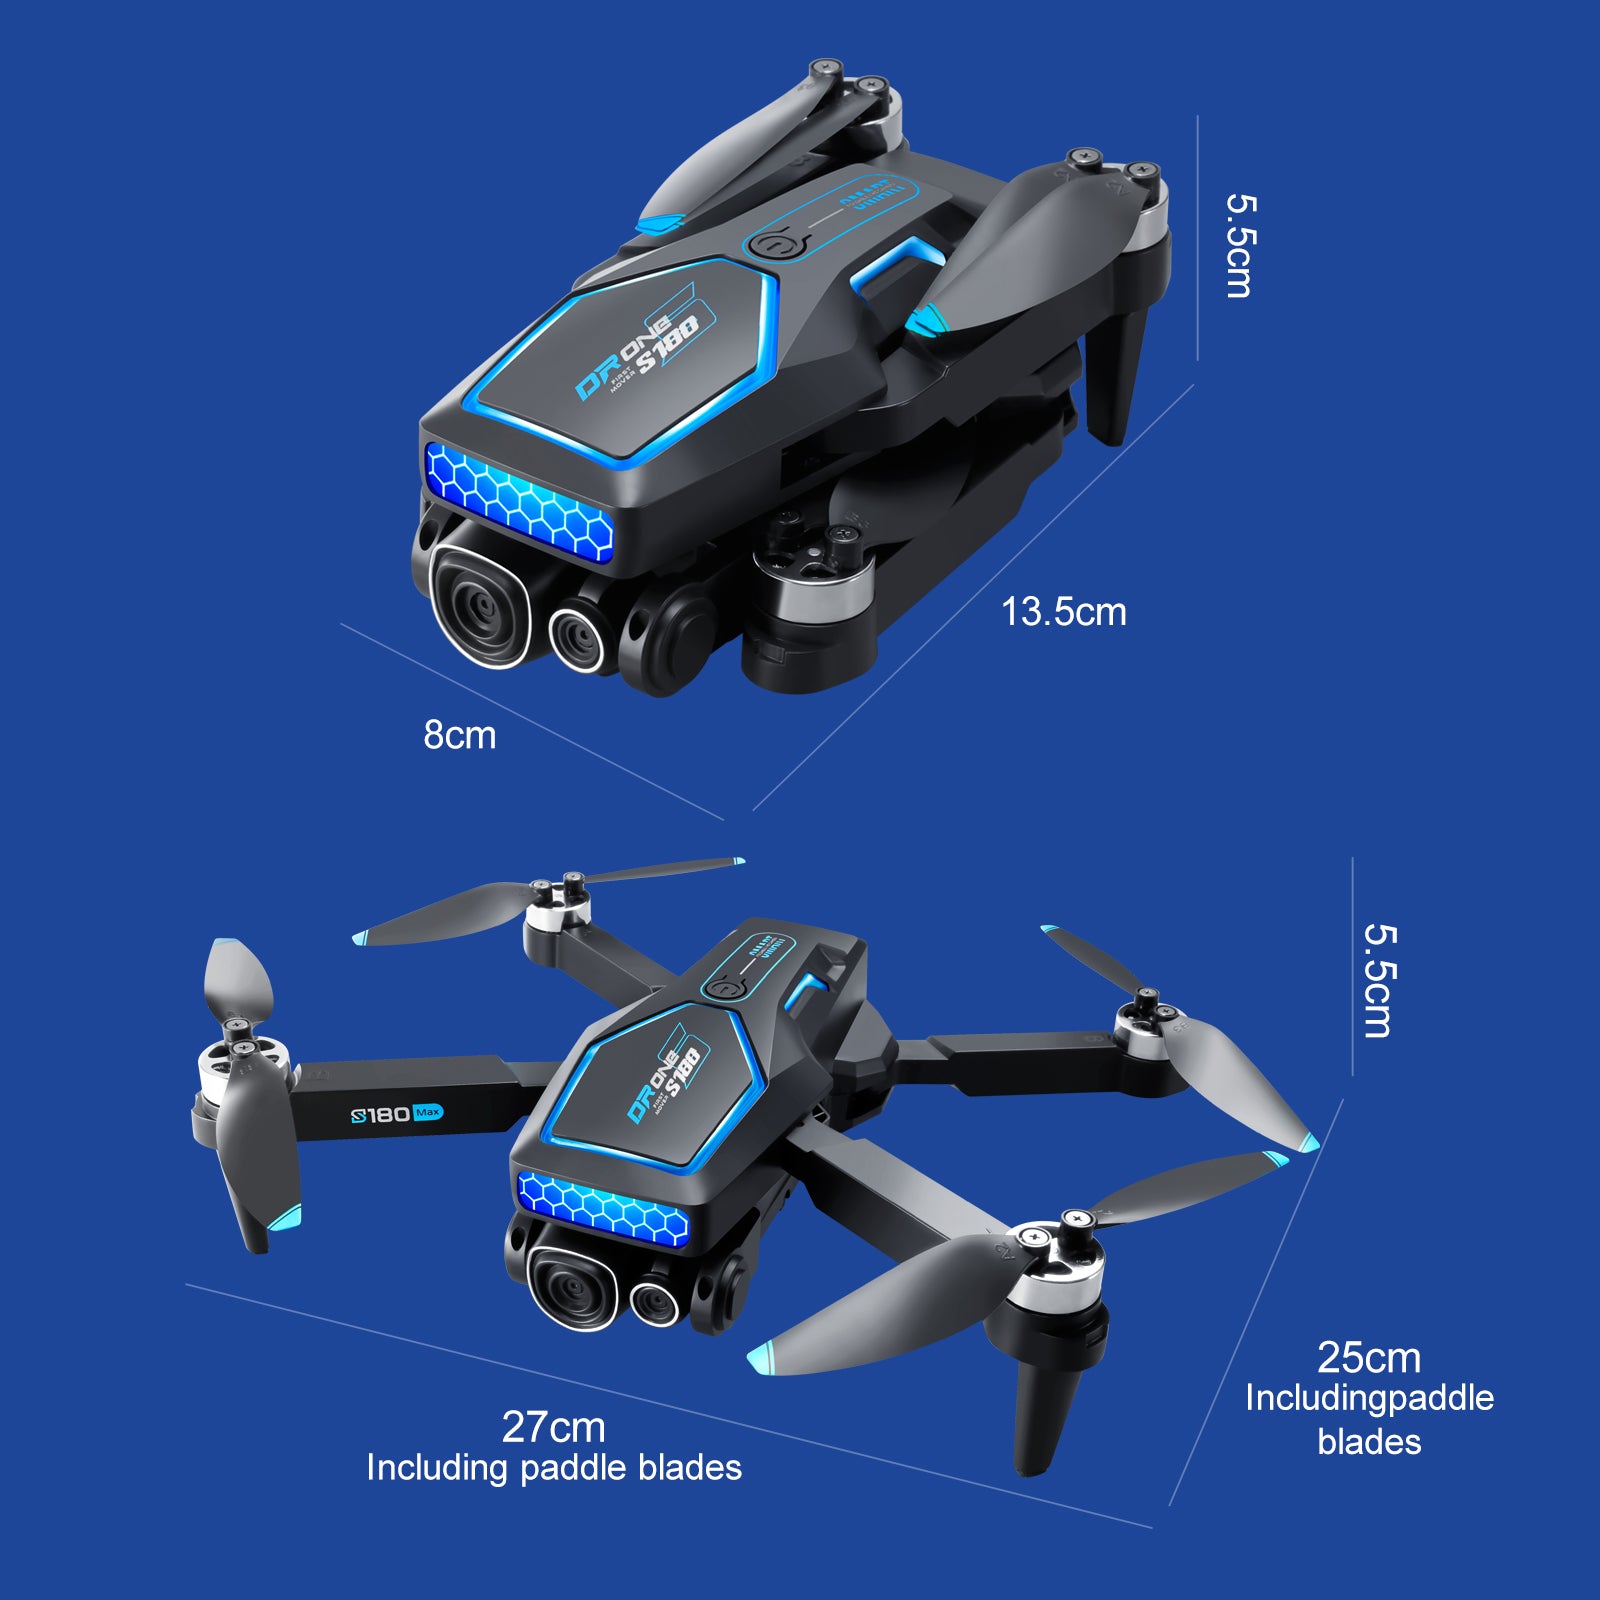 S180 Drone, Compact drone with paddle blades, measures 25cm (9.8in) with detachable paddle.